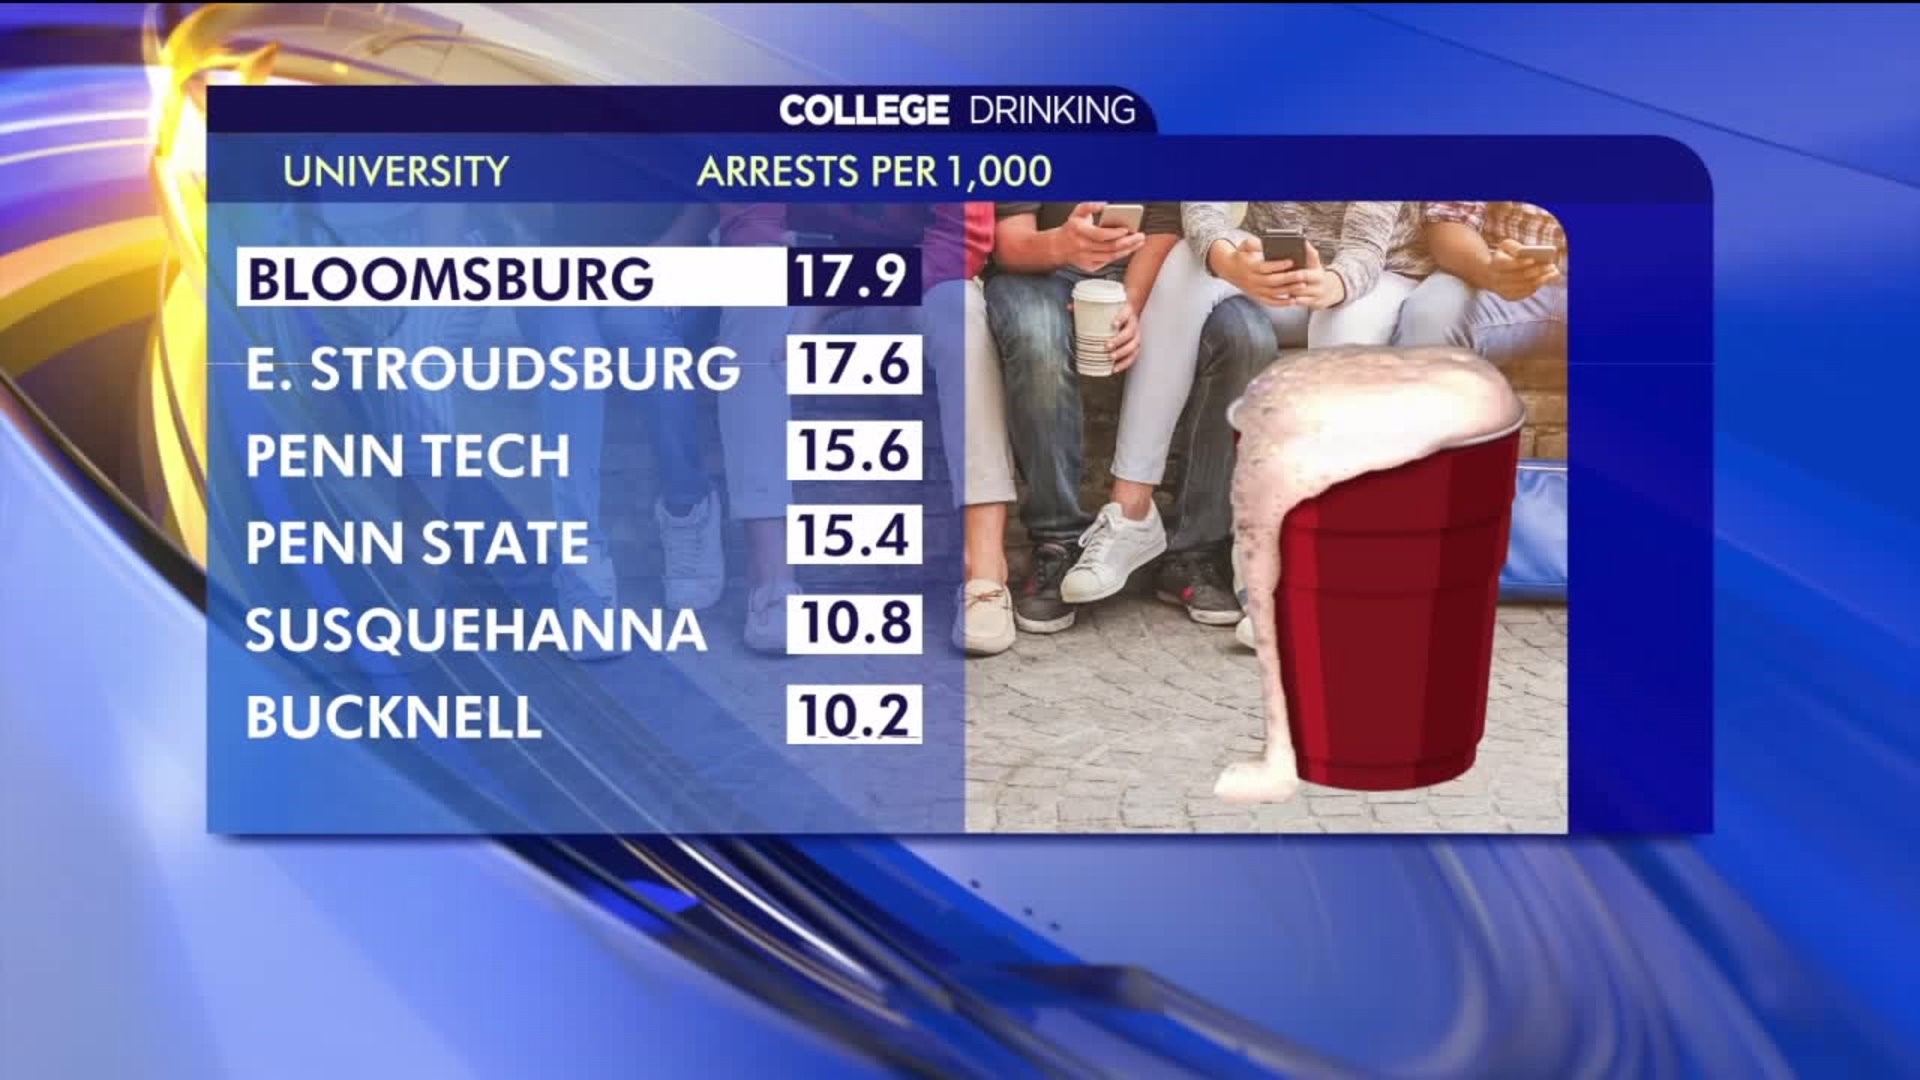 College Drinking Arrests in PA: A Look at the Numbers